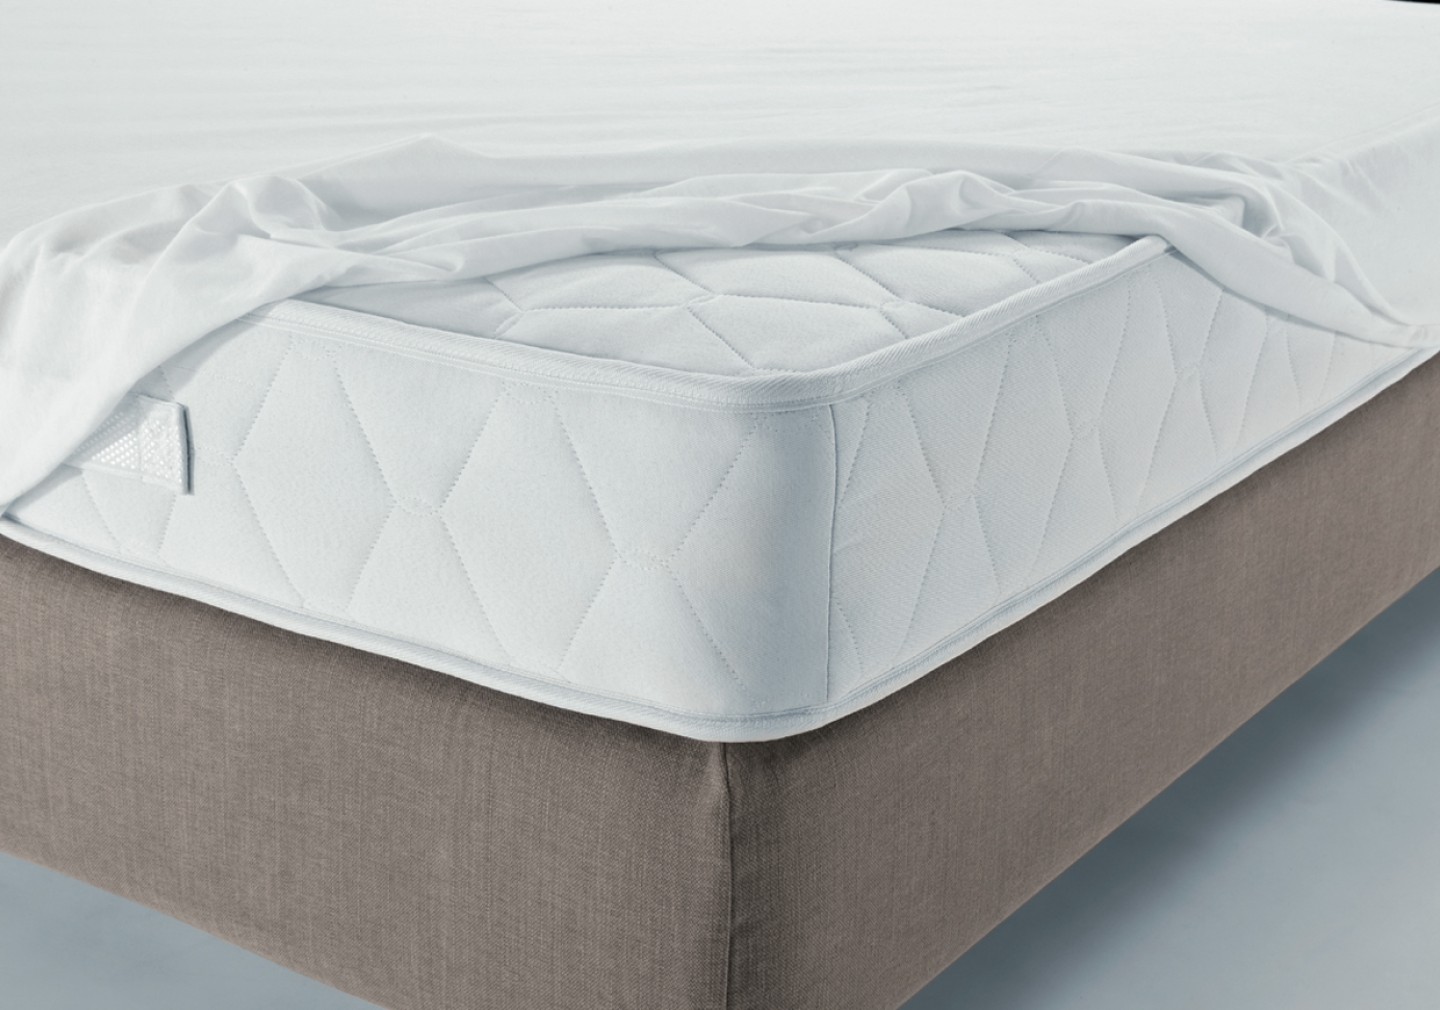 MATRESS PROTECTIVE COVER - Sealy White Cool